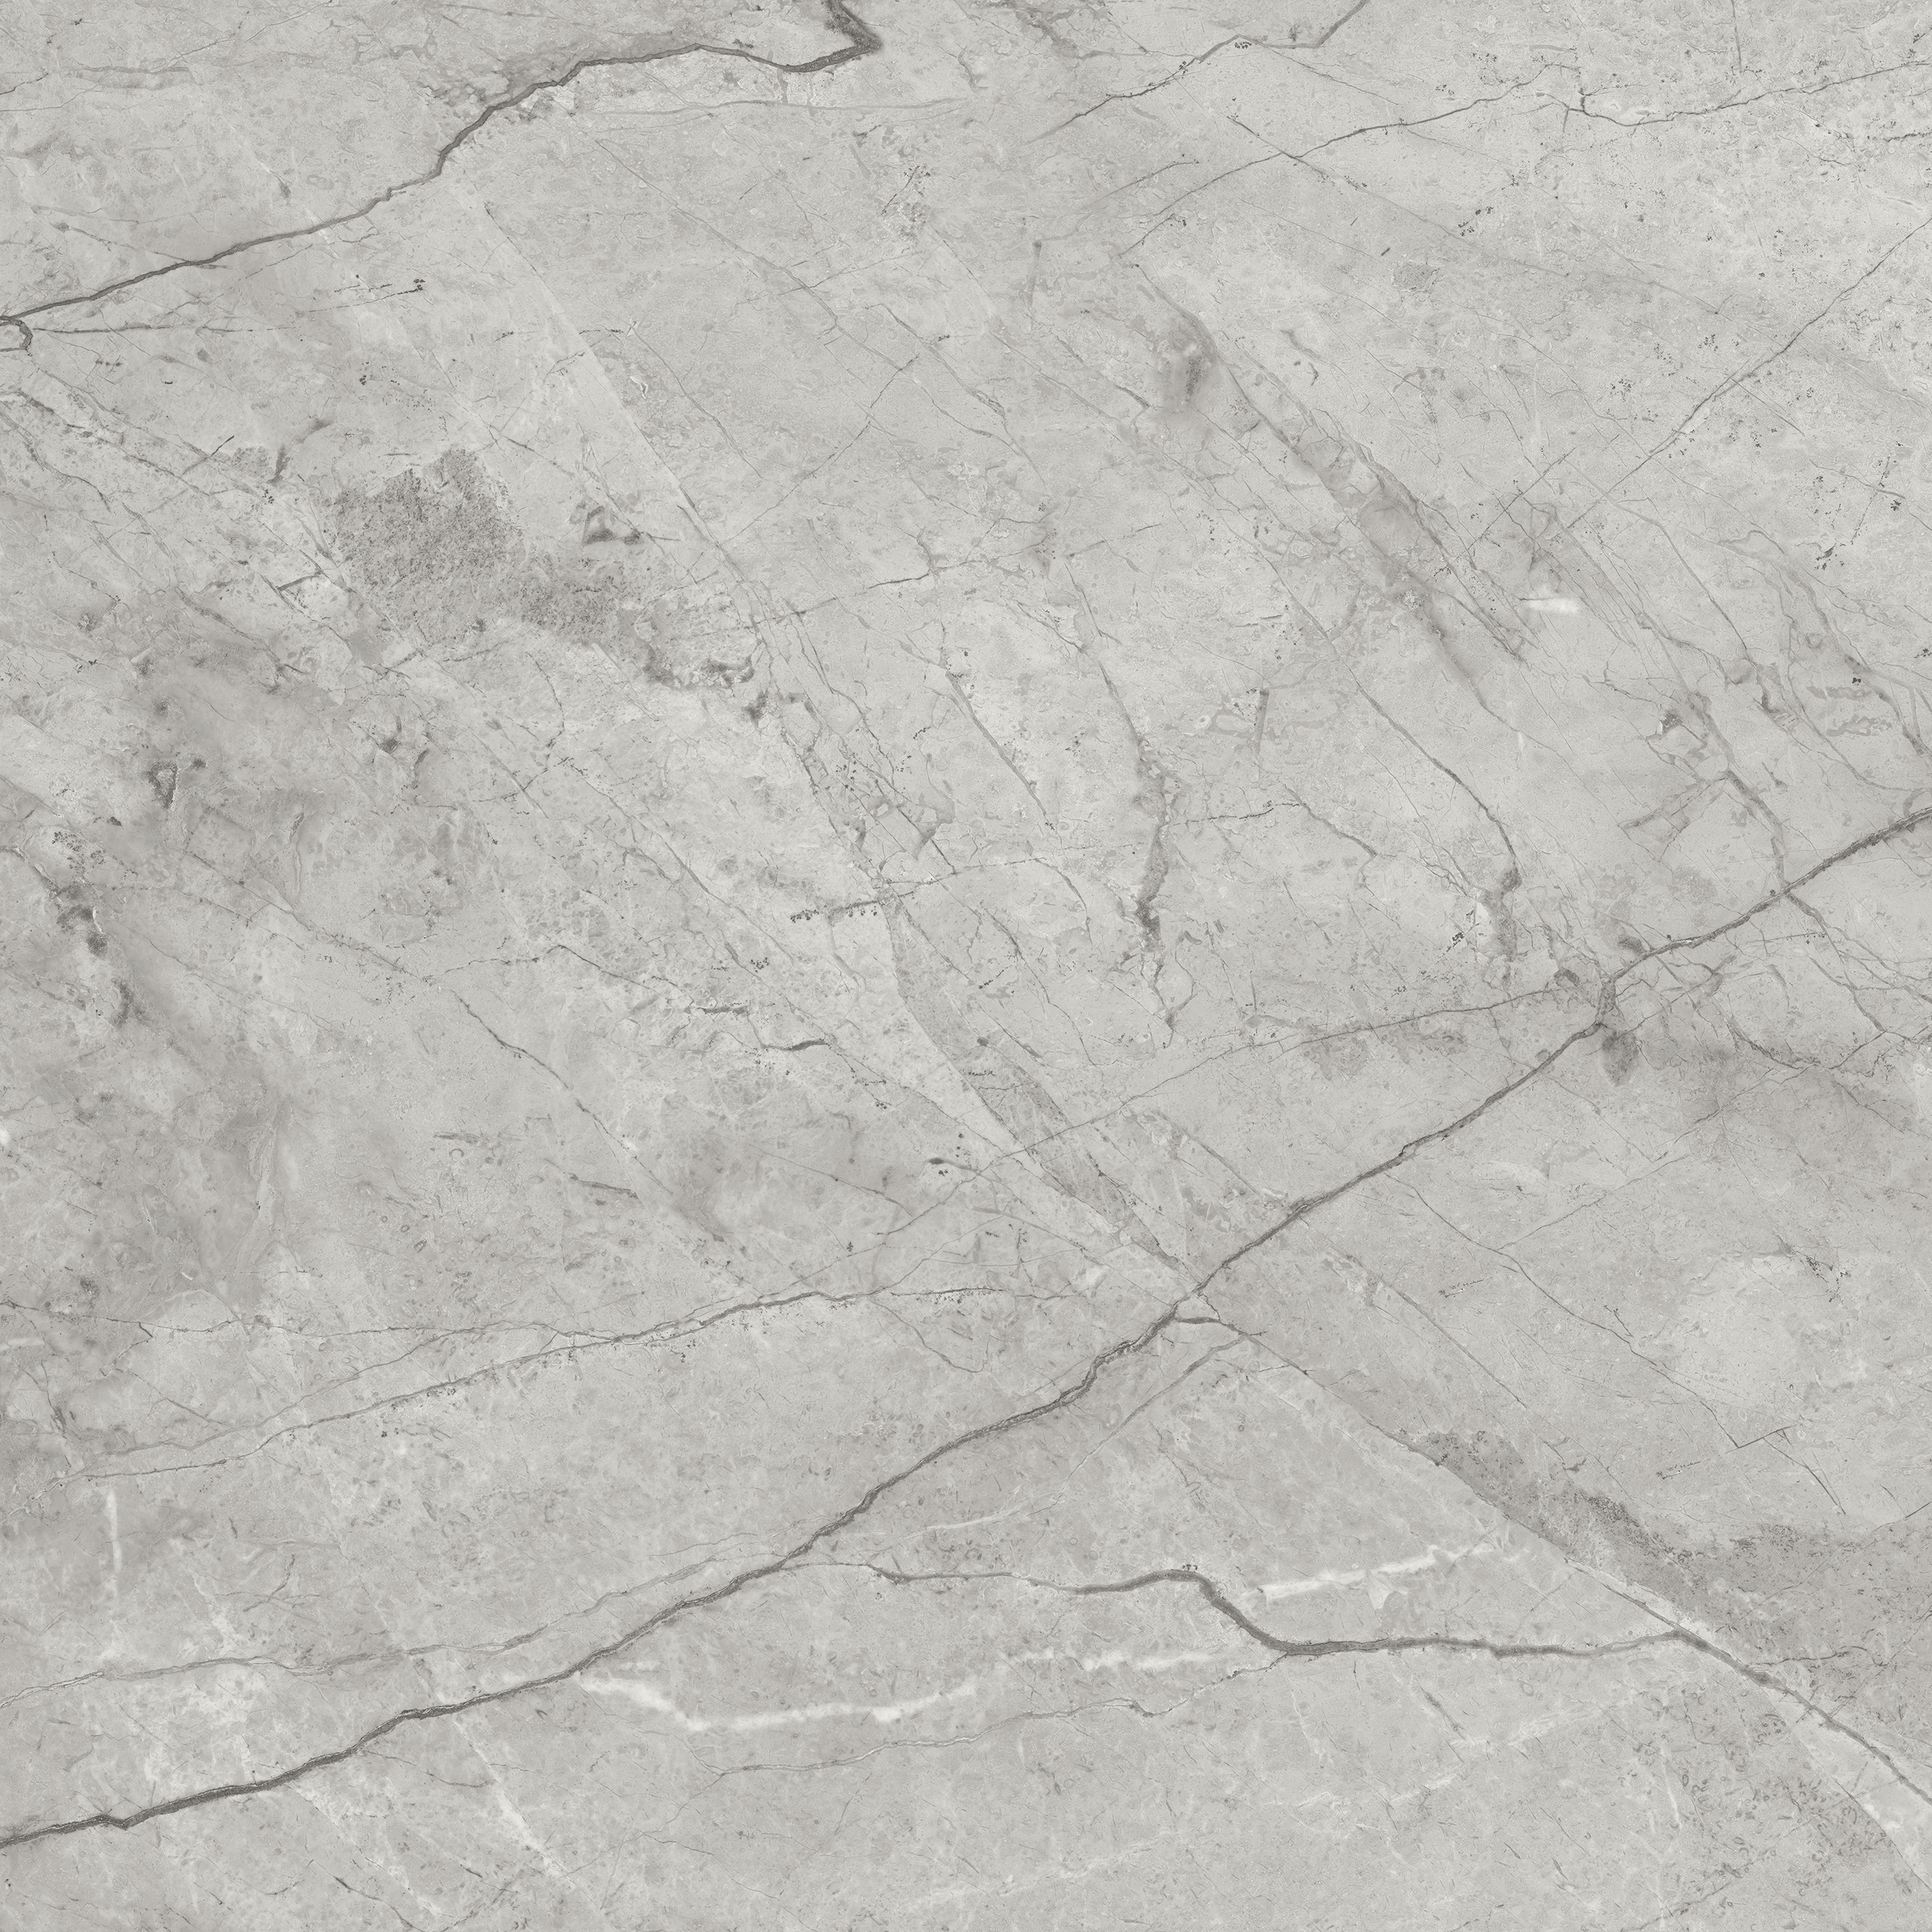 paradiso argento pattern glazed porcelain field tile from la marca anatolia collection distributed by surface group international honed finish rectified edge 24x24 square shape